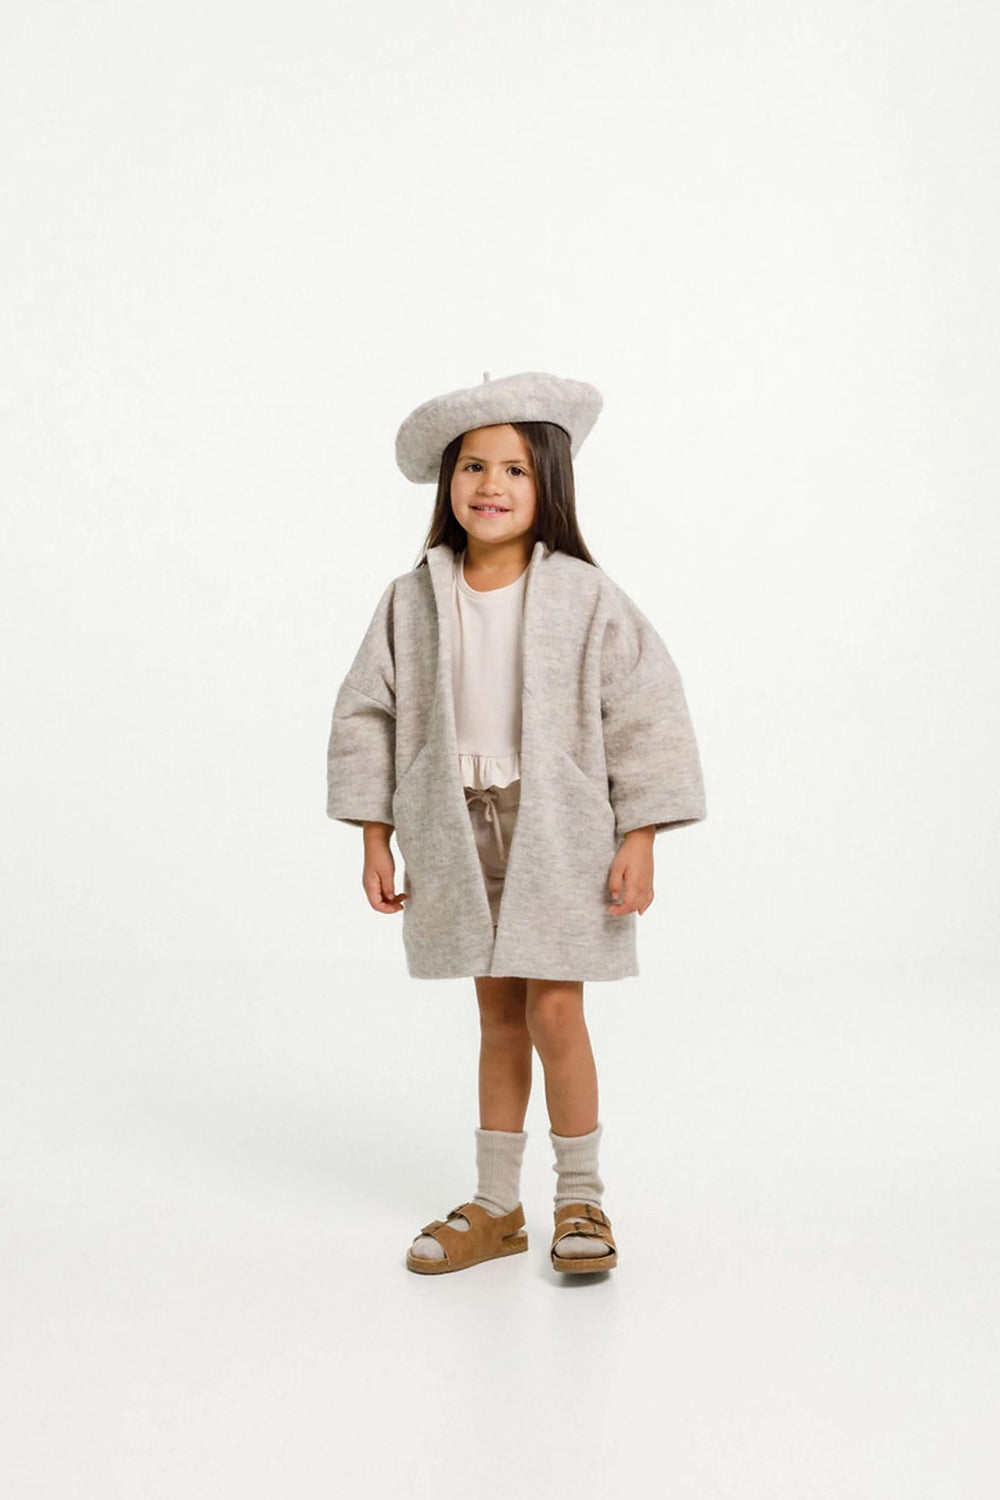 Child wearing the Nova Coat sewing pattern from Papercut Patterns on The Fold Line. A dress pattern made in light cotton, linen, rayon or heavy wool fabrics, featuring angled seaming with hidden pockets, long sleeves, full length, relaxed fit and fully li